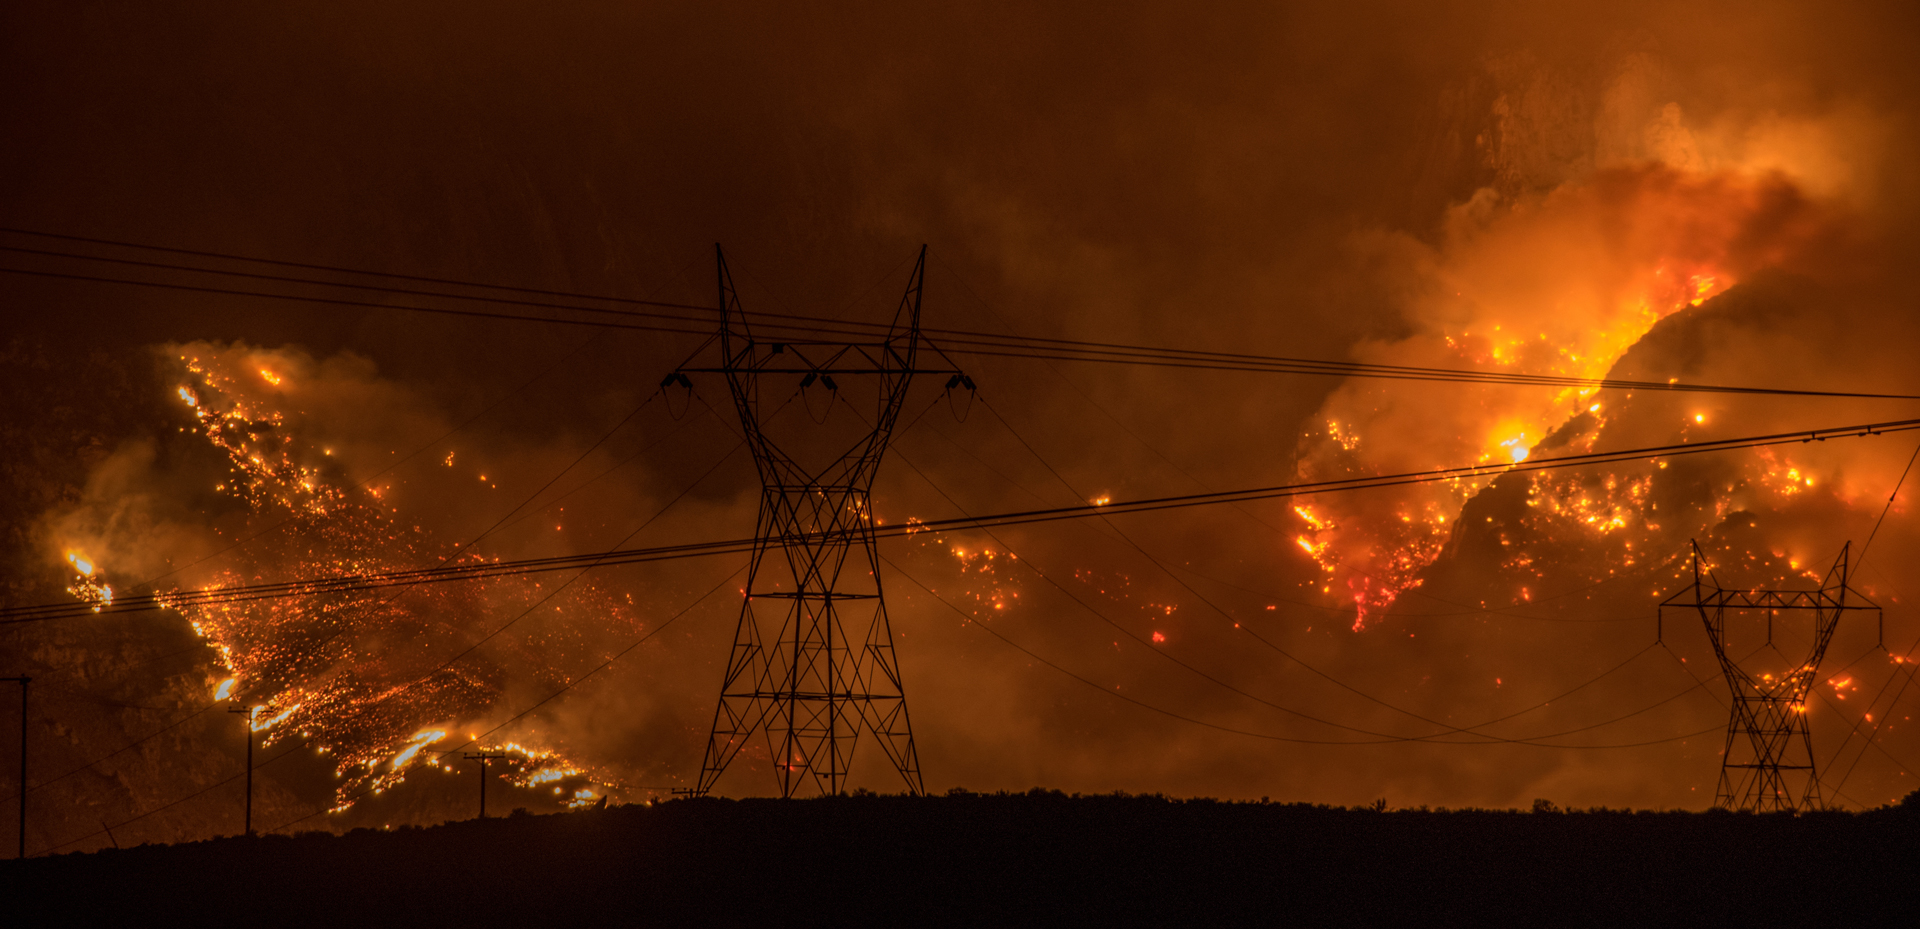 An intense wildfire, glowing orange is spreading in the background behind two tall electricity pylons